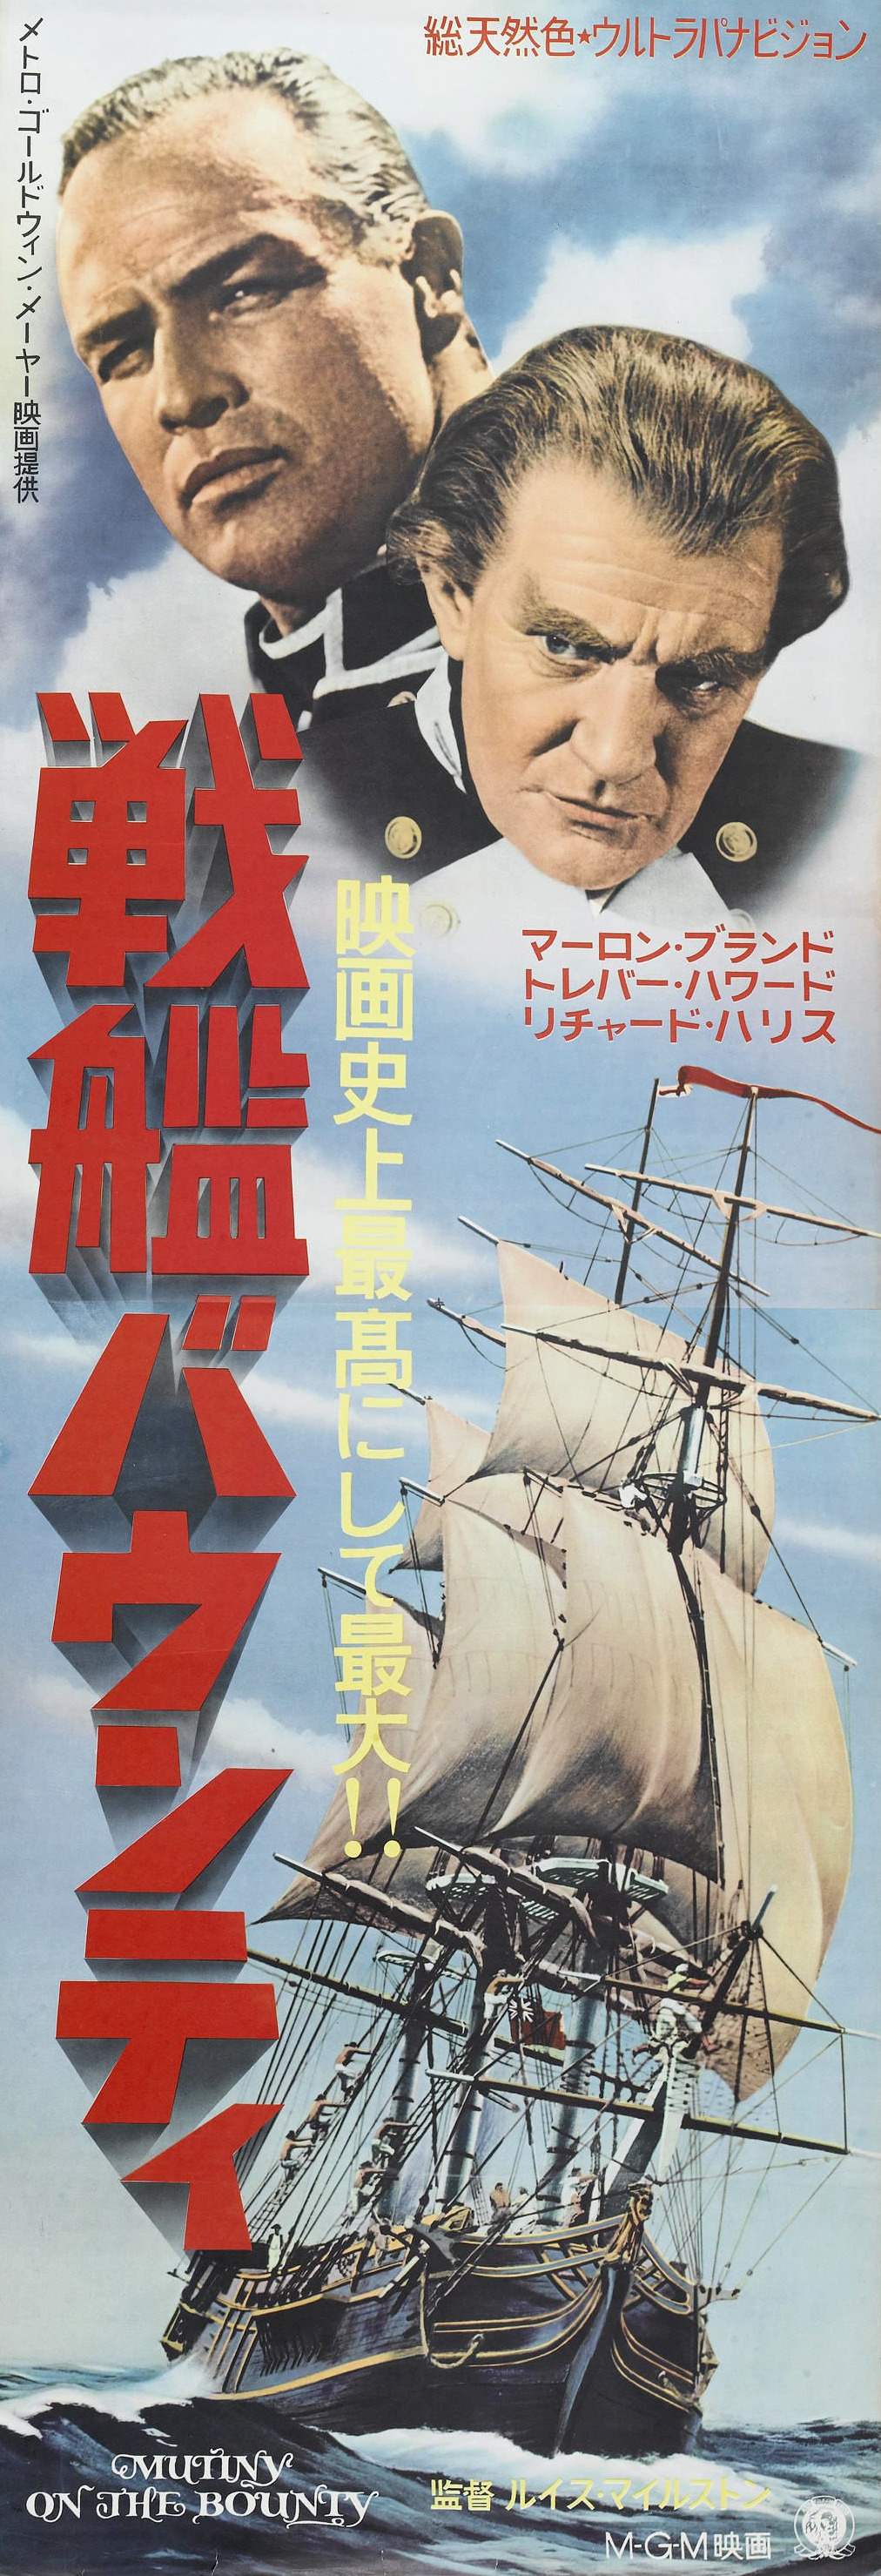 Mega Sized Movie Poster Image for Mutiny on the Bounty (#11 of 16)